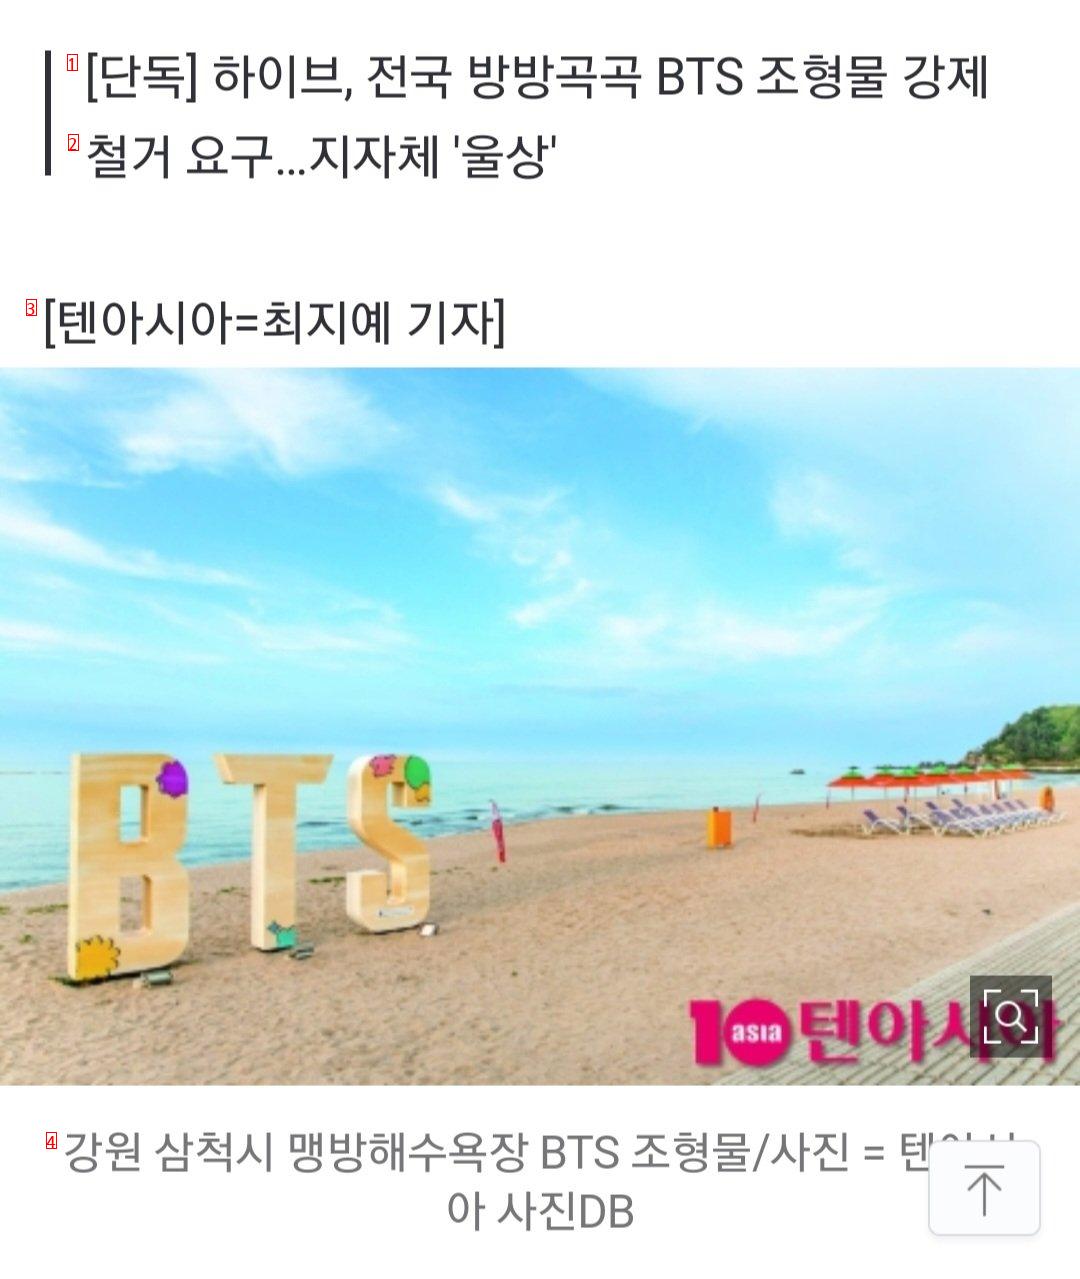 The lone Samcheok BTS sculpture will be demolished at the request of Hive…BTS Tourist Destinations nationwide are on alert